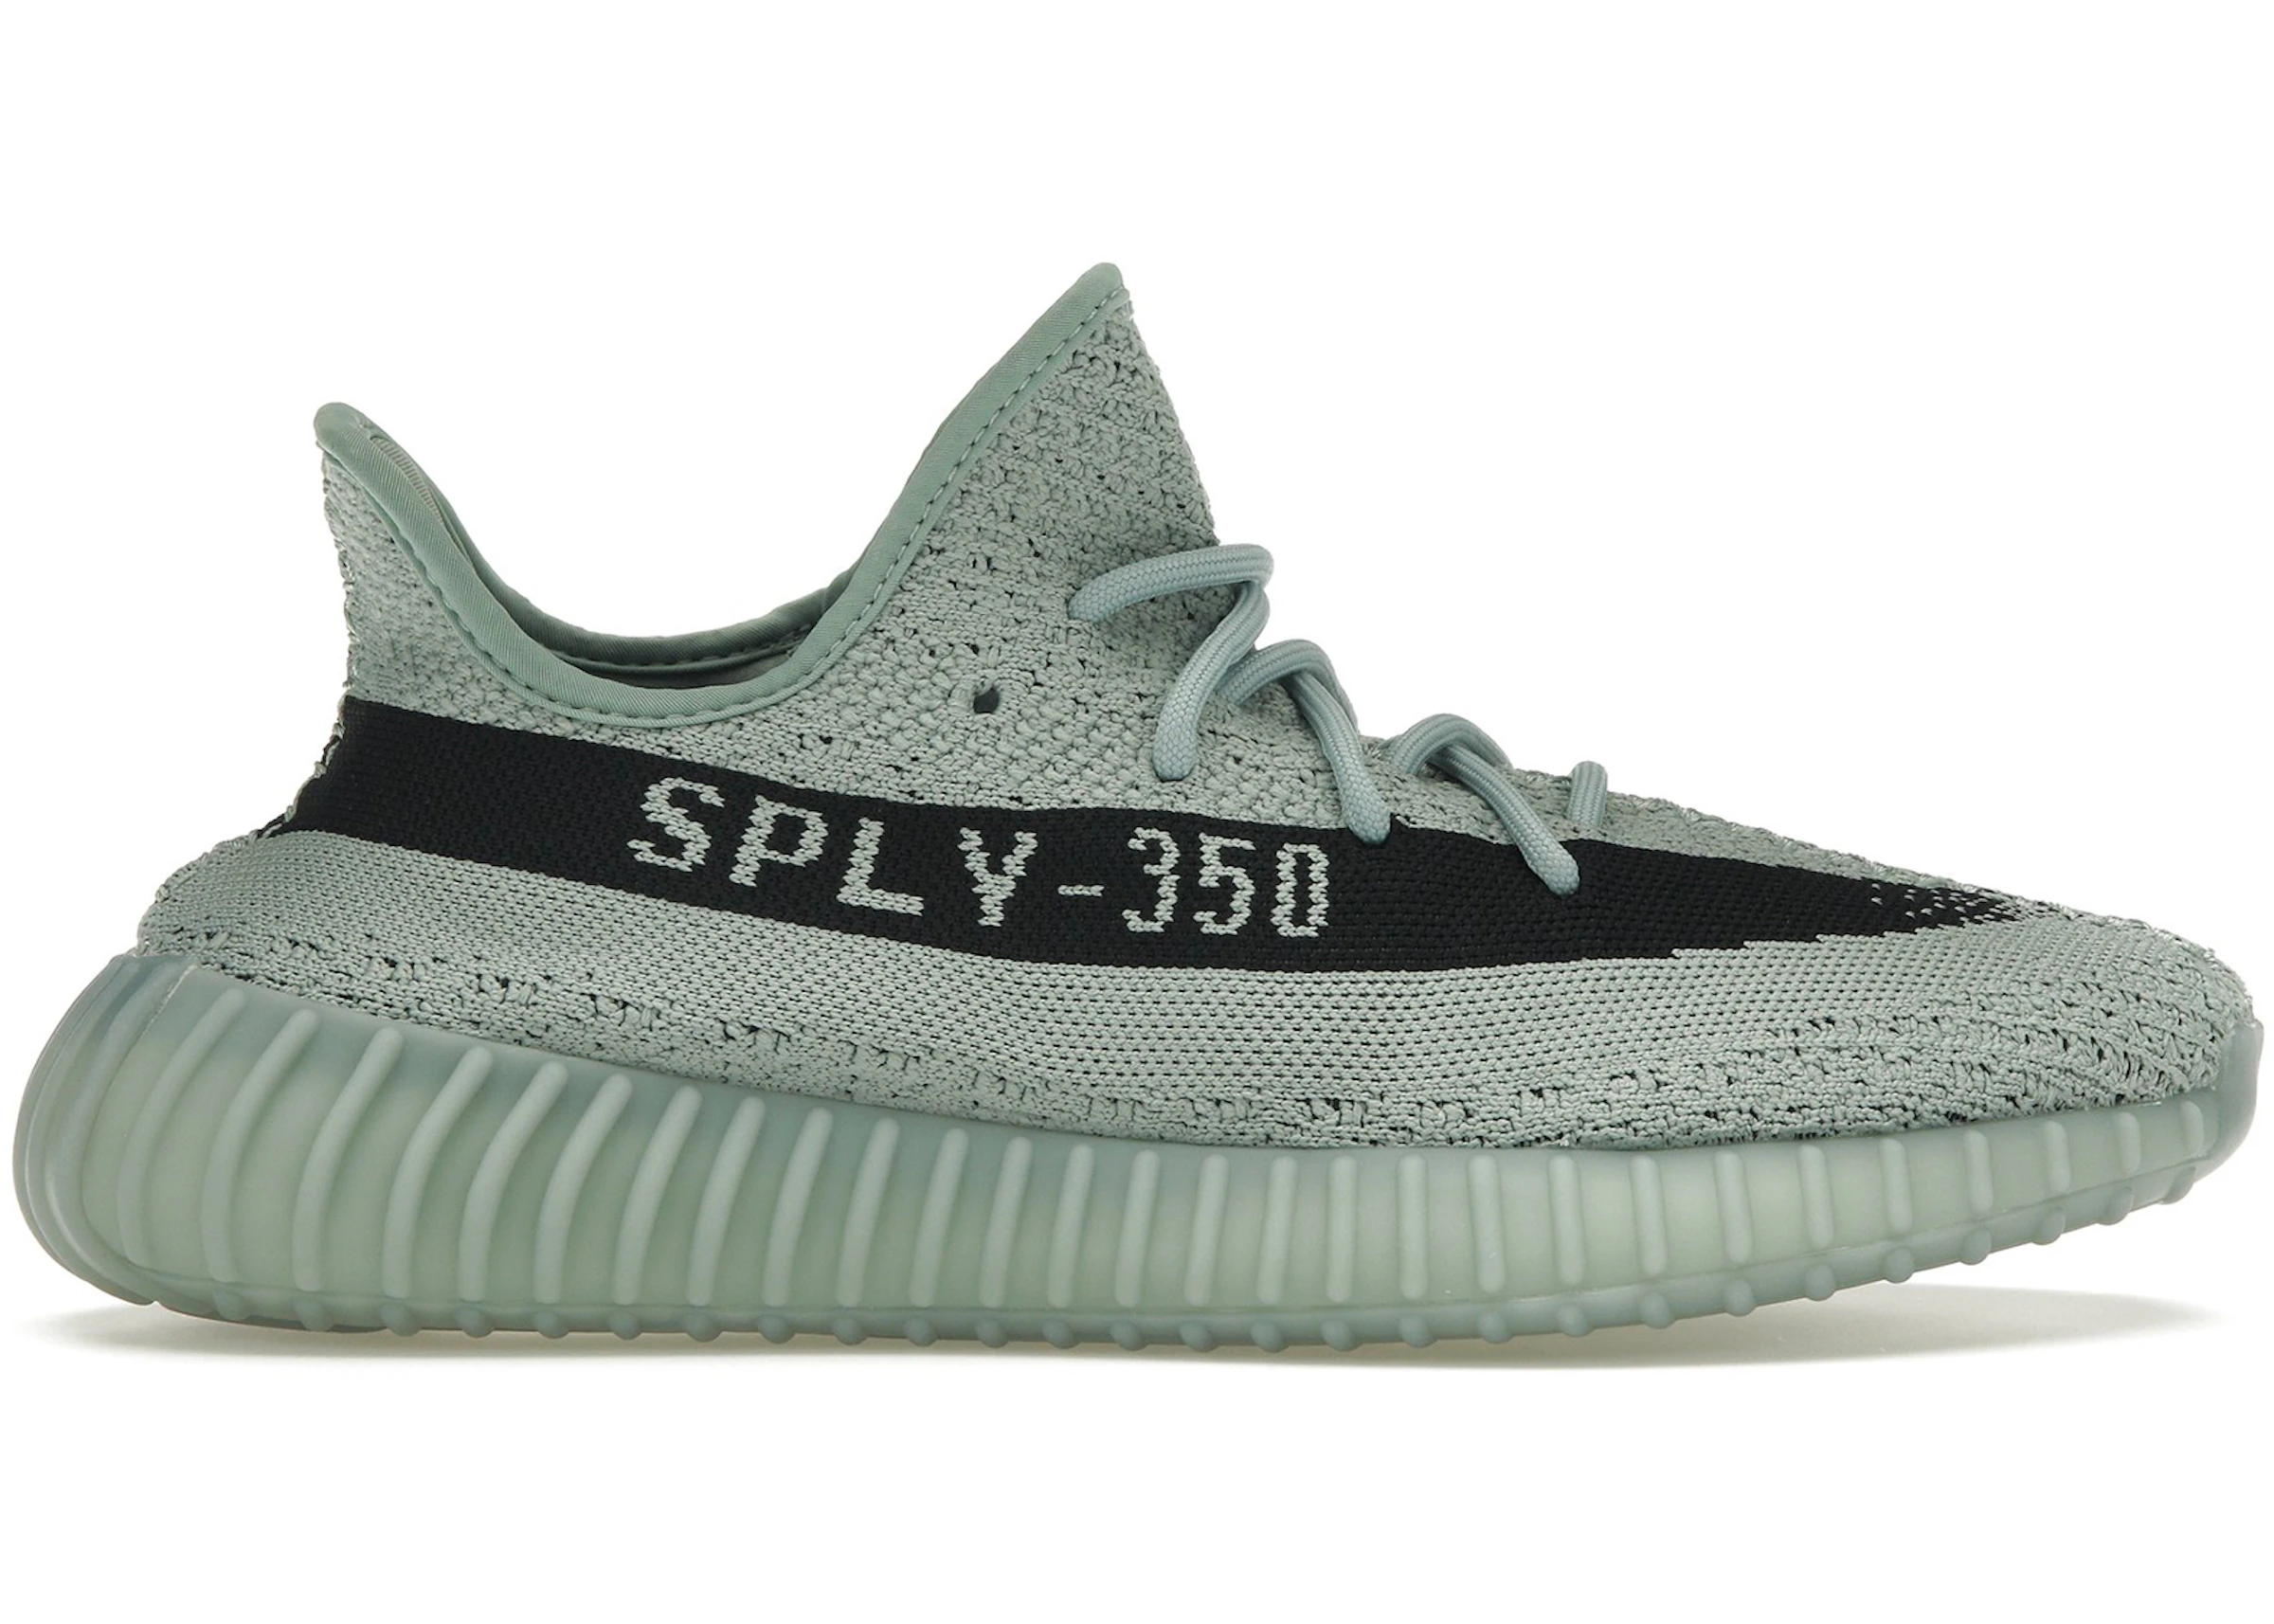 Messed up Repair possible Rotate adidas Yeezy Boost 350 V2 Salt - HQ2060 - US